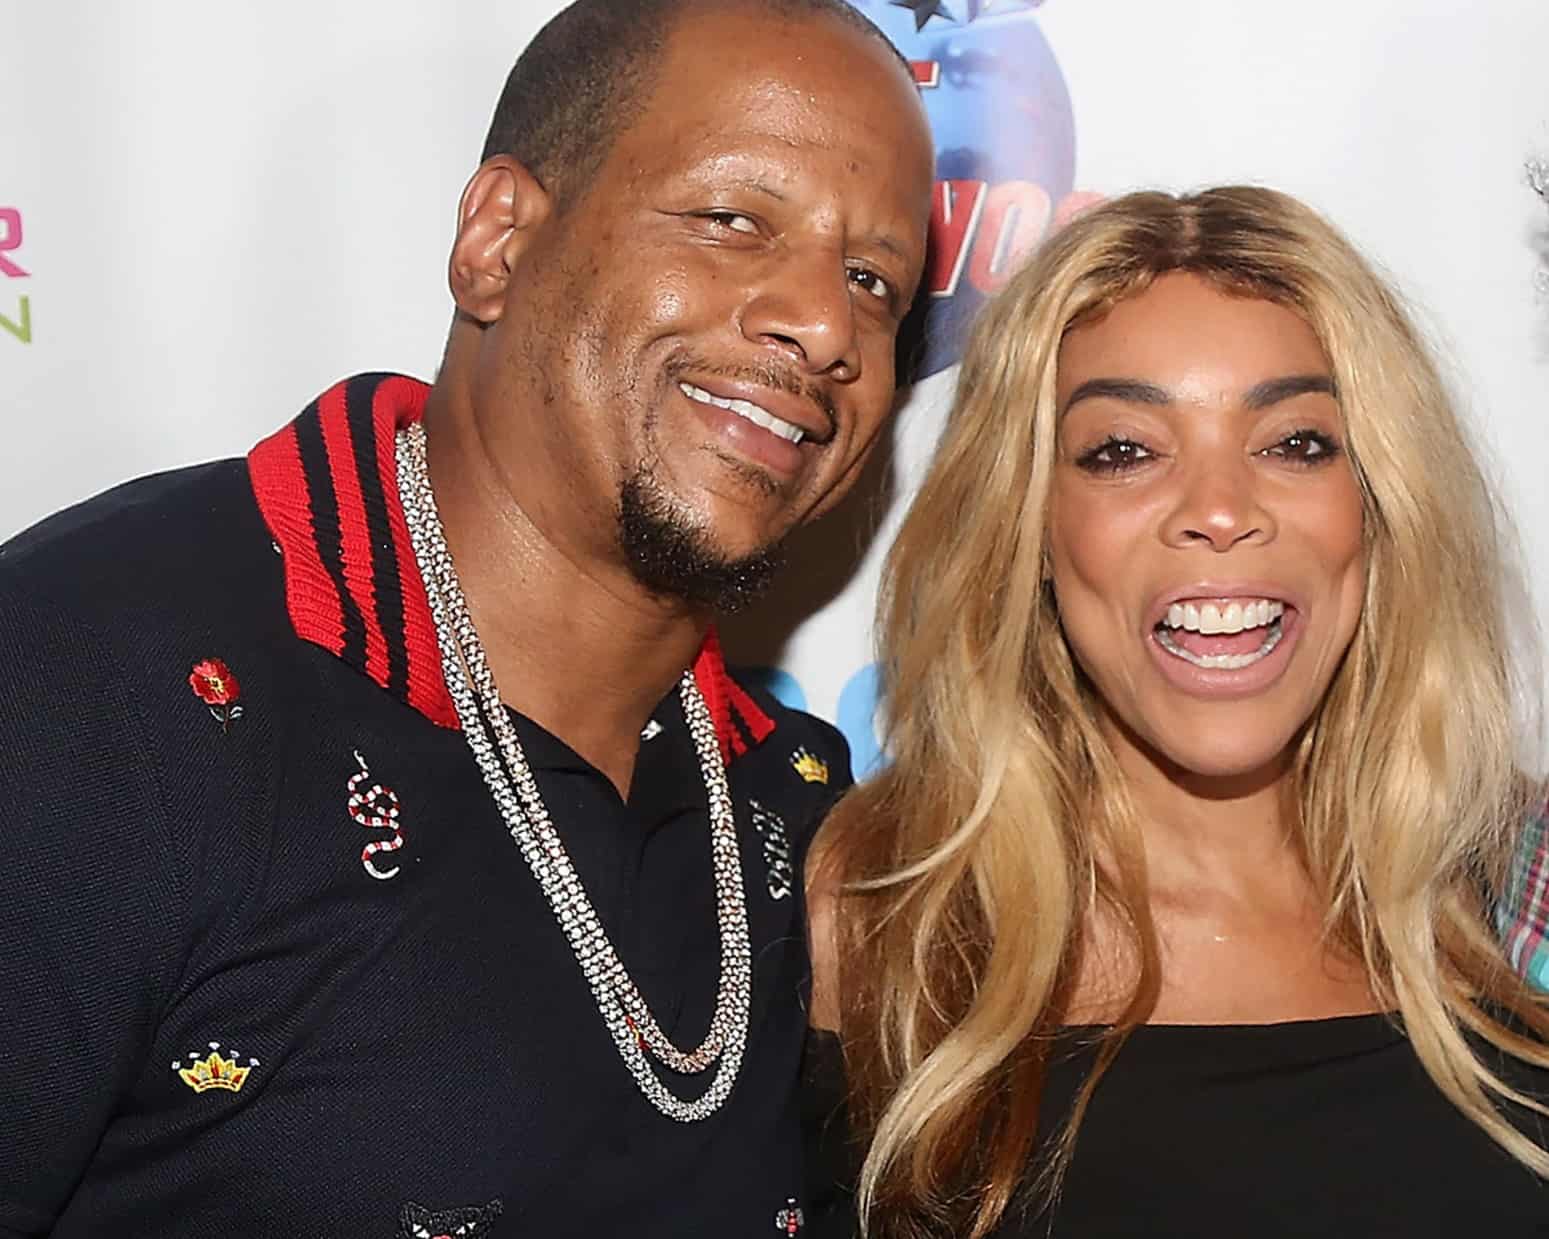 Wendy Williams' second husband, Kevin Hunter